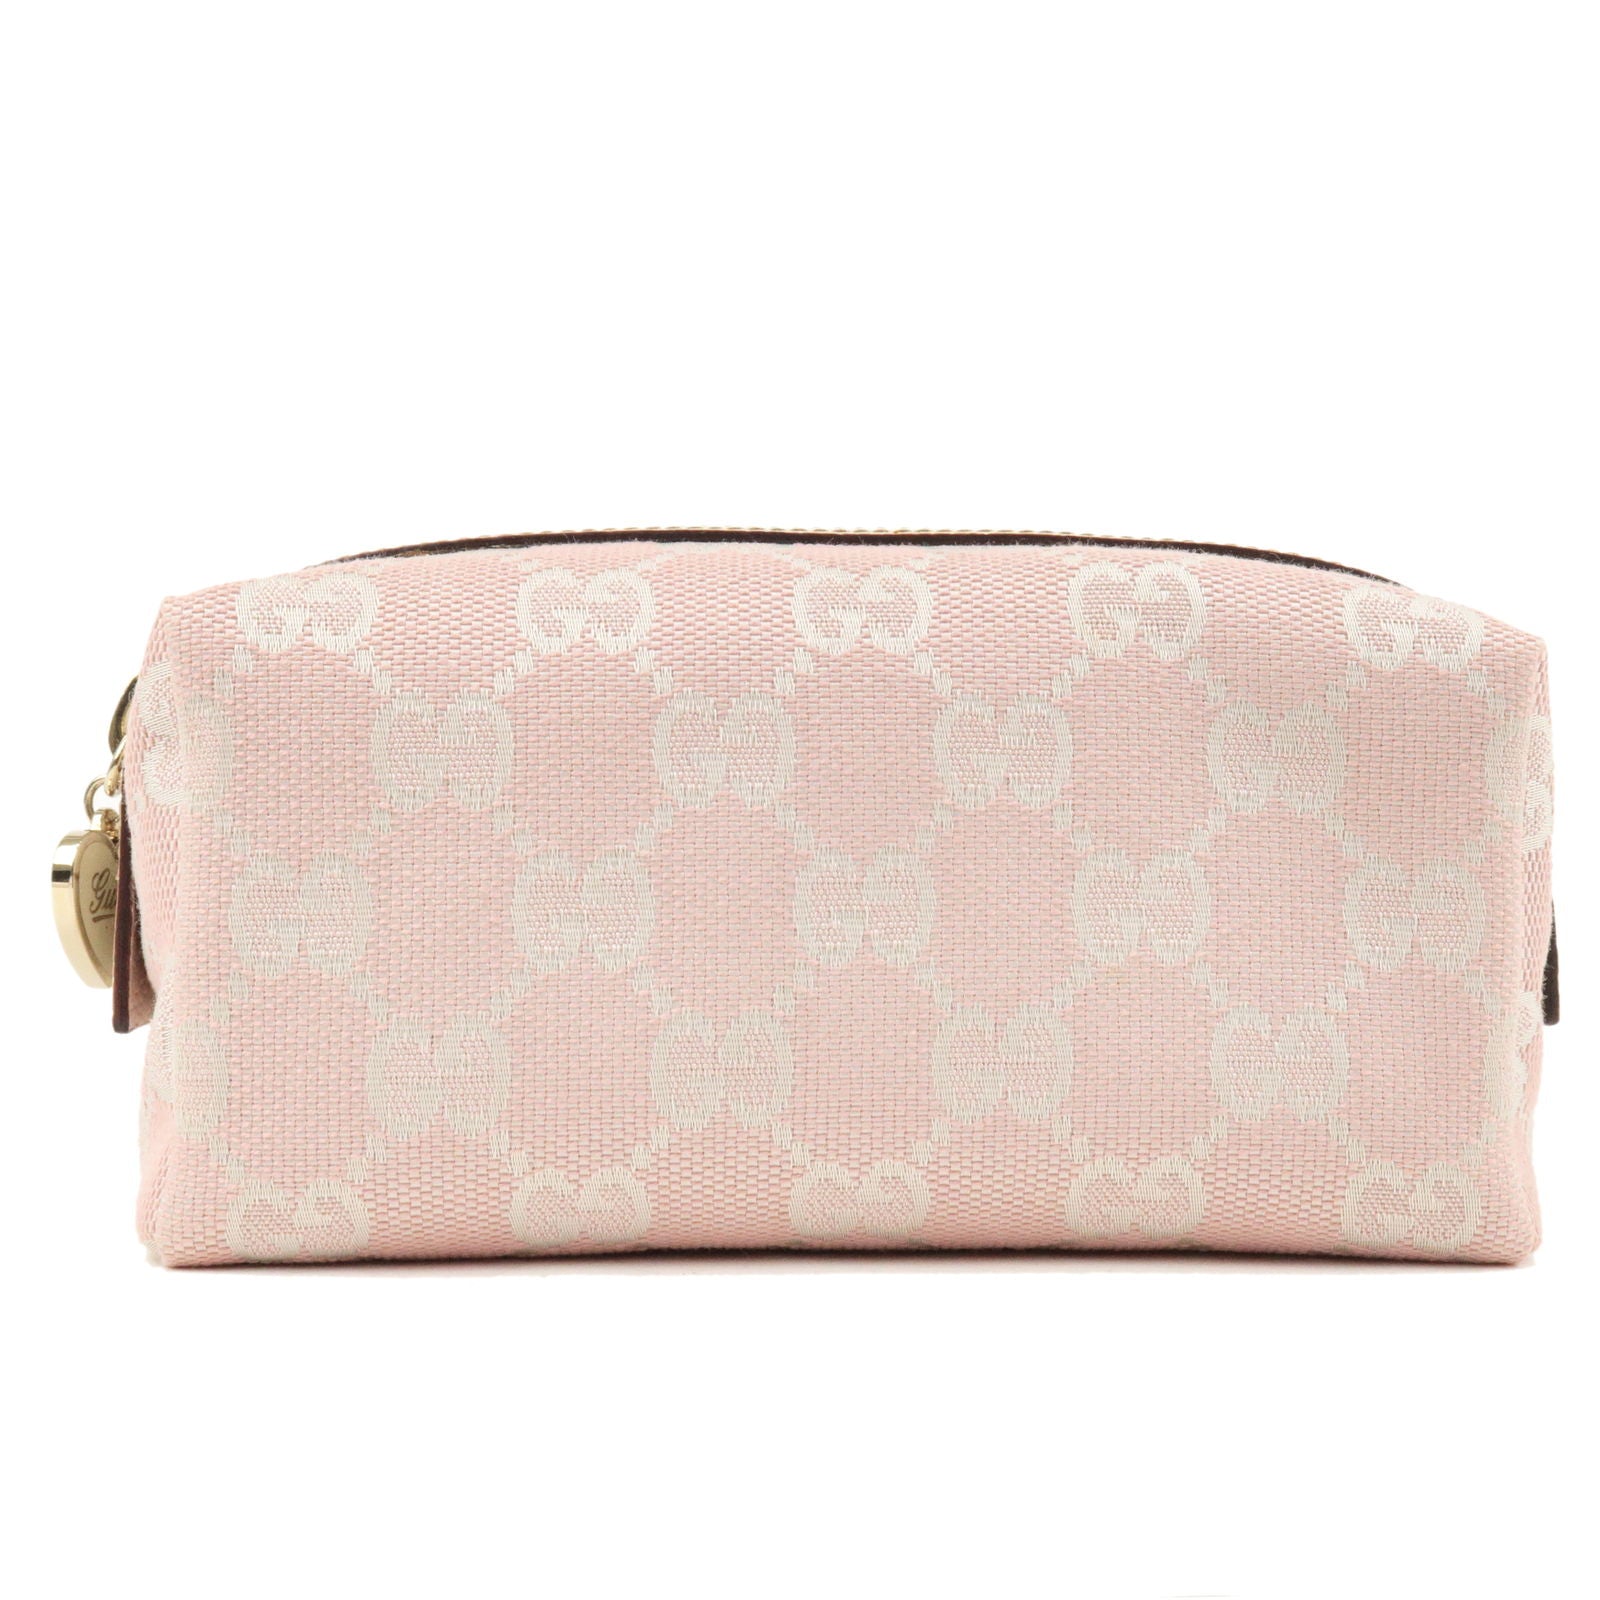 Auth GUCCI Pouch Cosmetic Bag Pink Ivory GG Canvas Leather 153228 Used